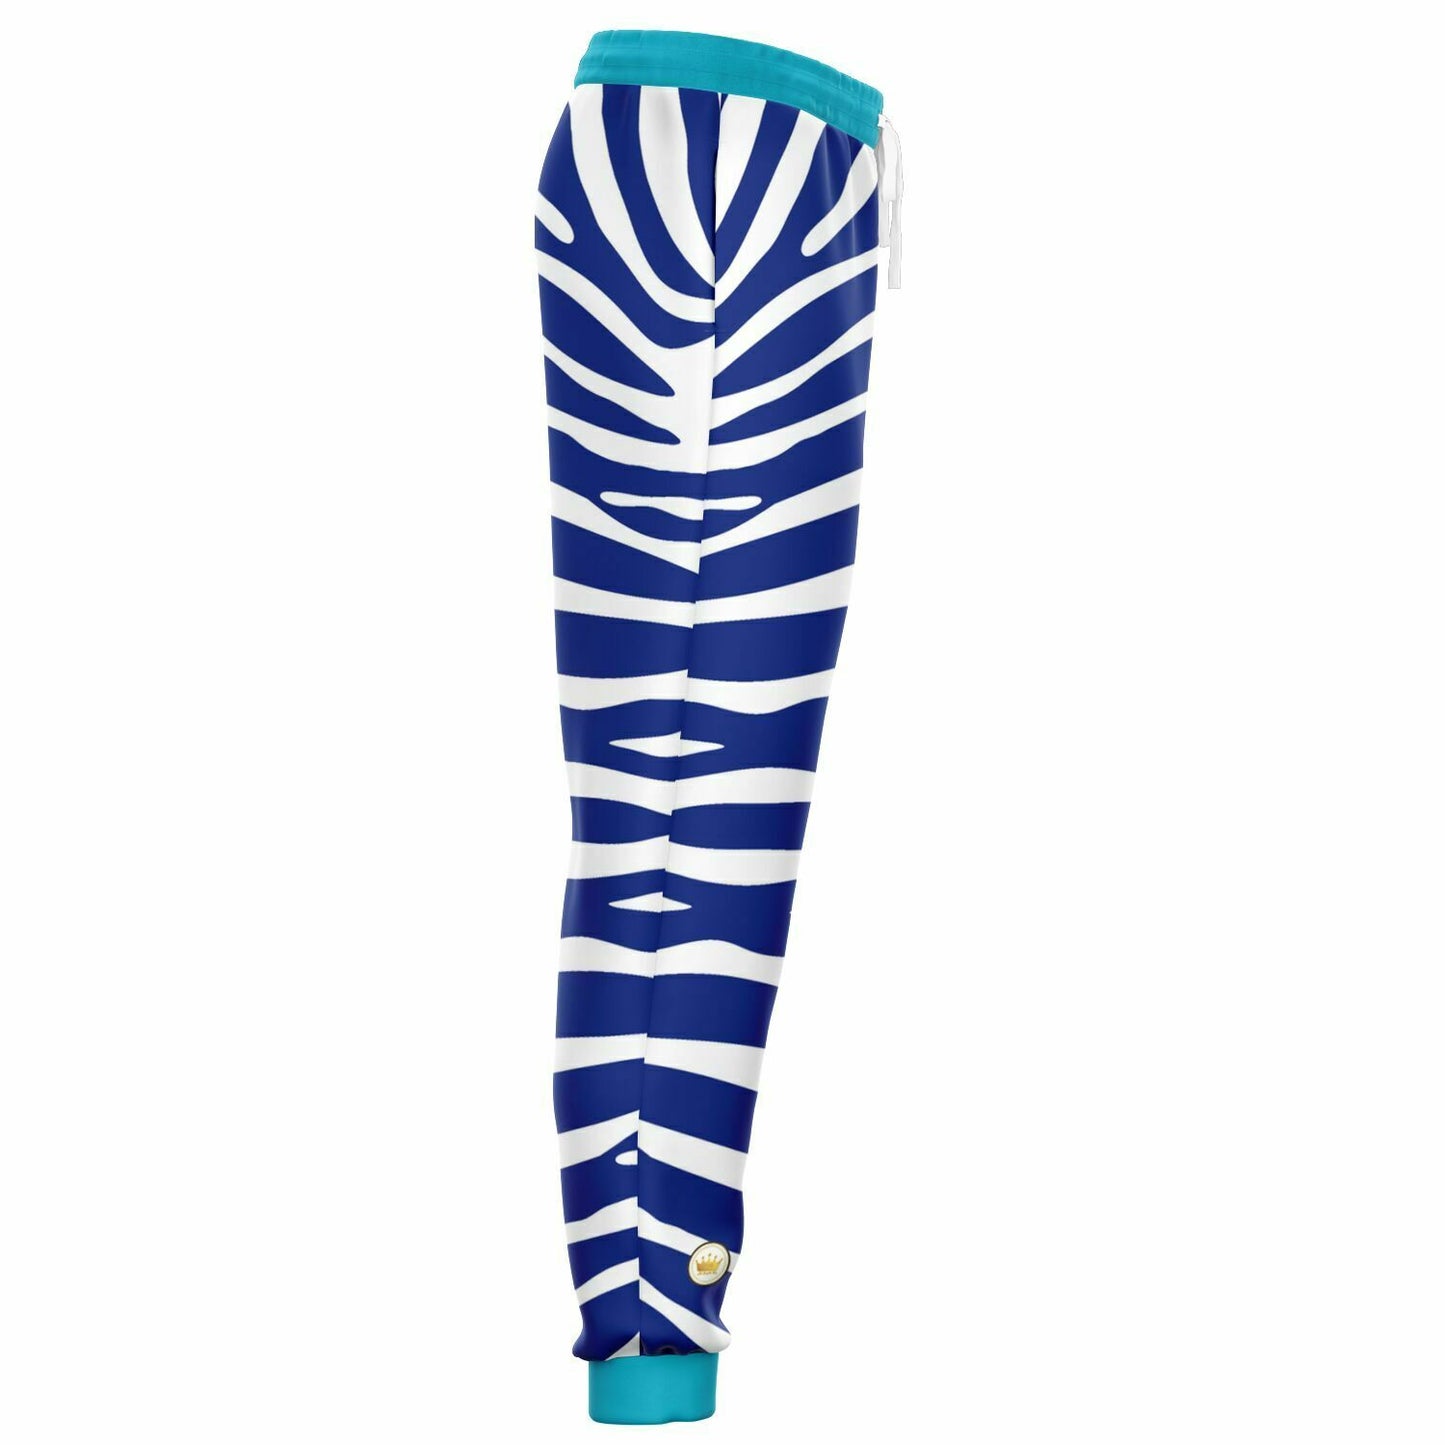 Zebra in Blue Royal Eco-Poly Unisex Joggers